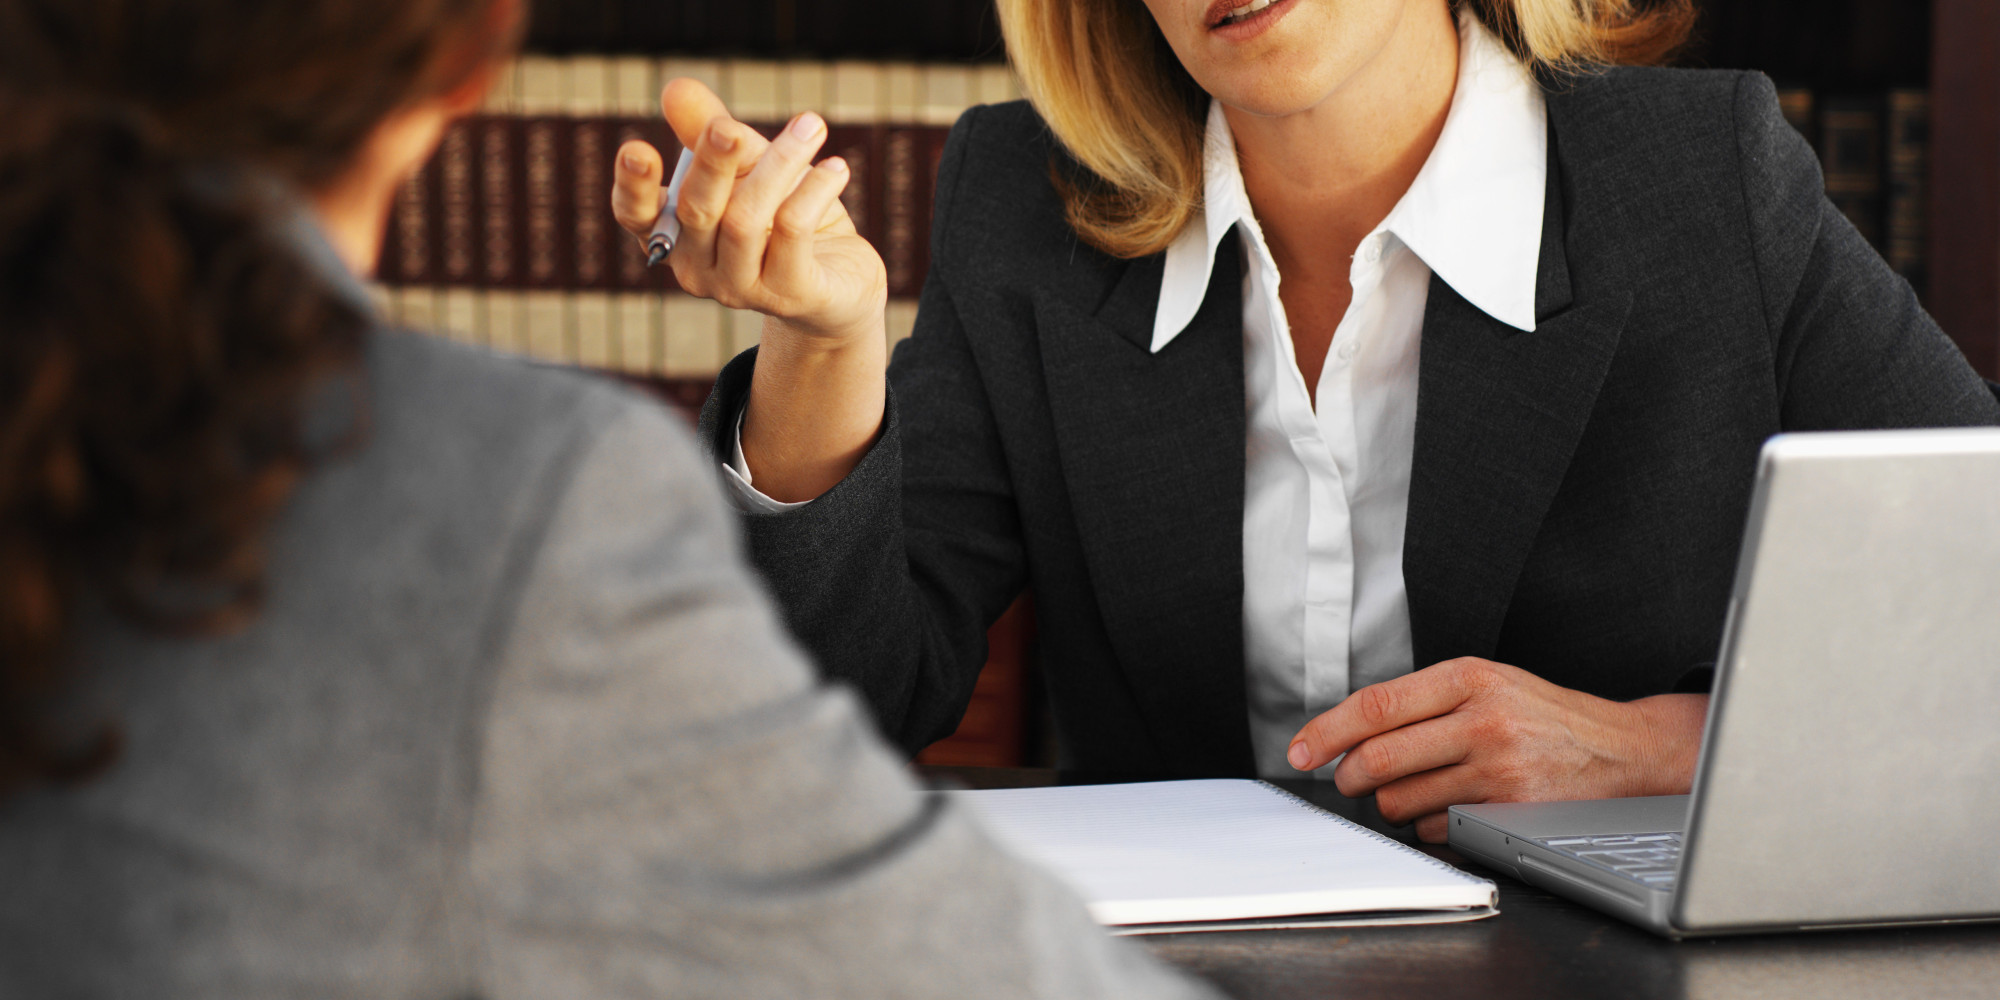 FIND THE BEST ATTORNEY TO SOLVE THE INJURIES EFFECTIVELY